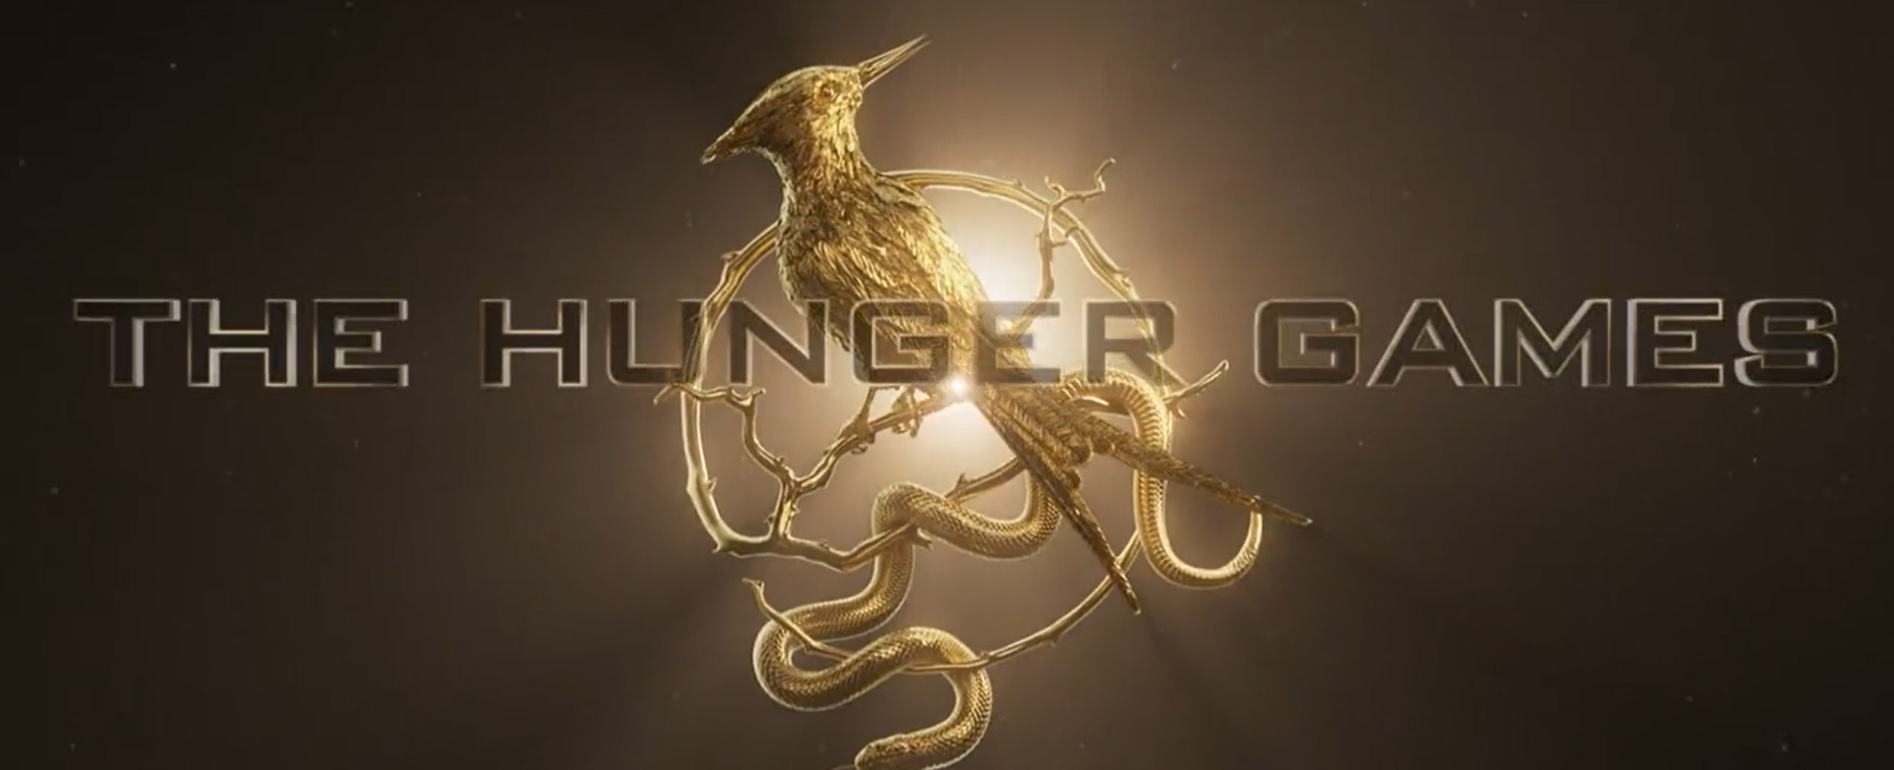 Teaser trailer for The Hunger Games prequel premieres